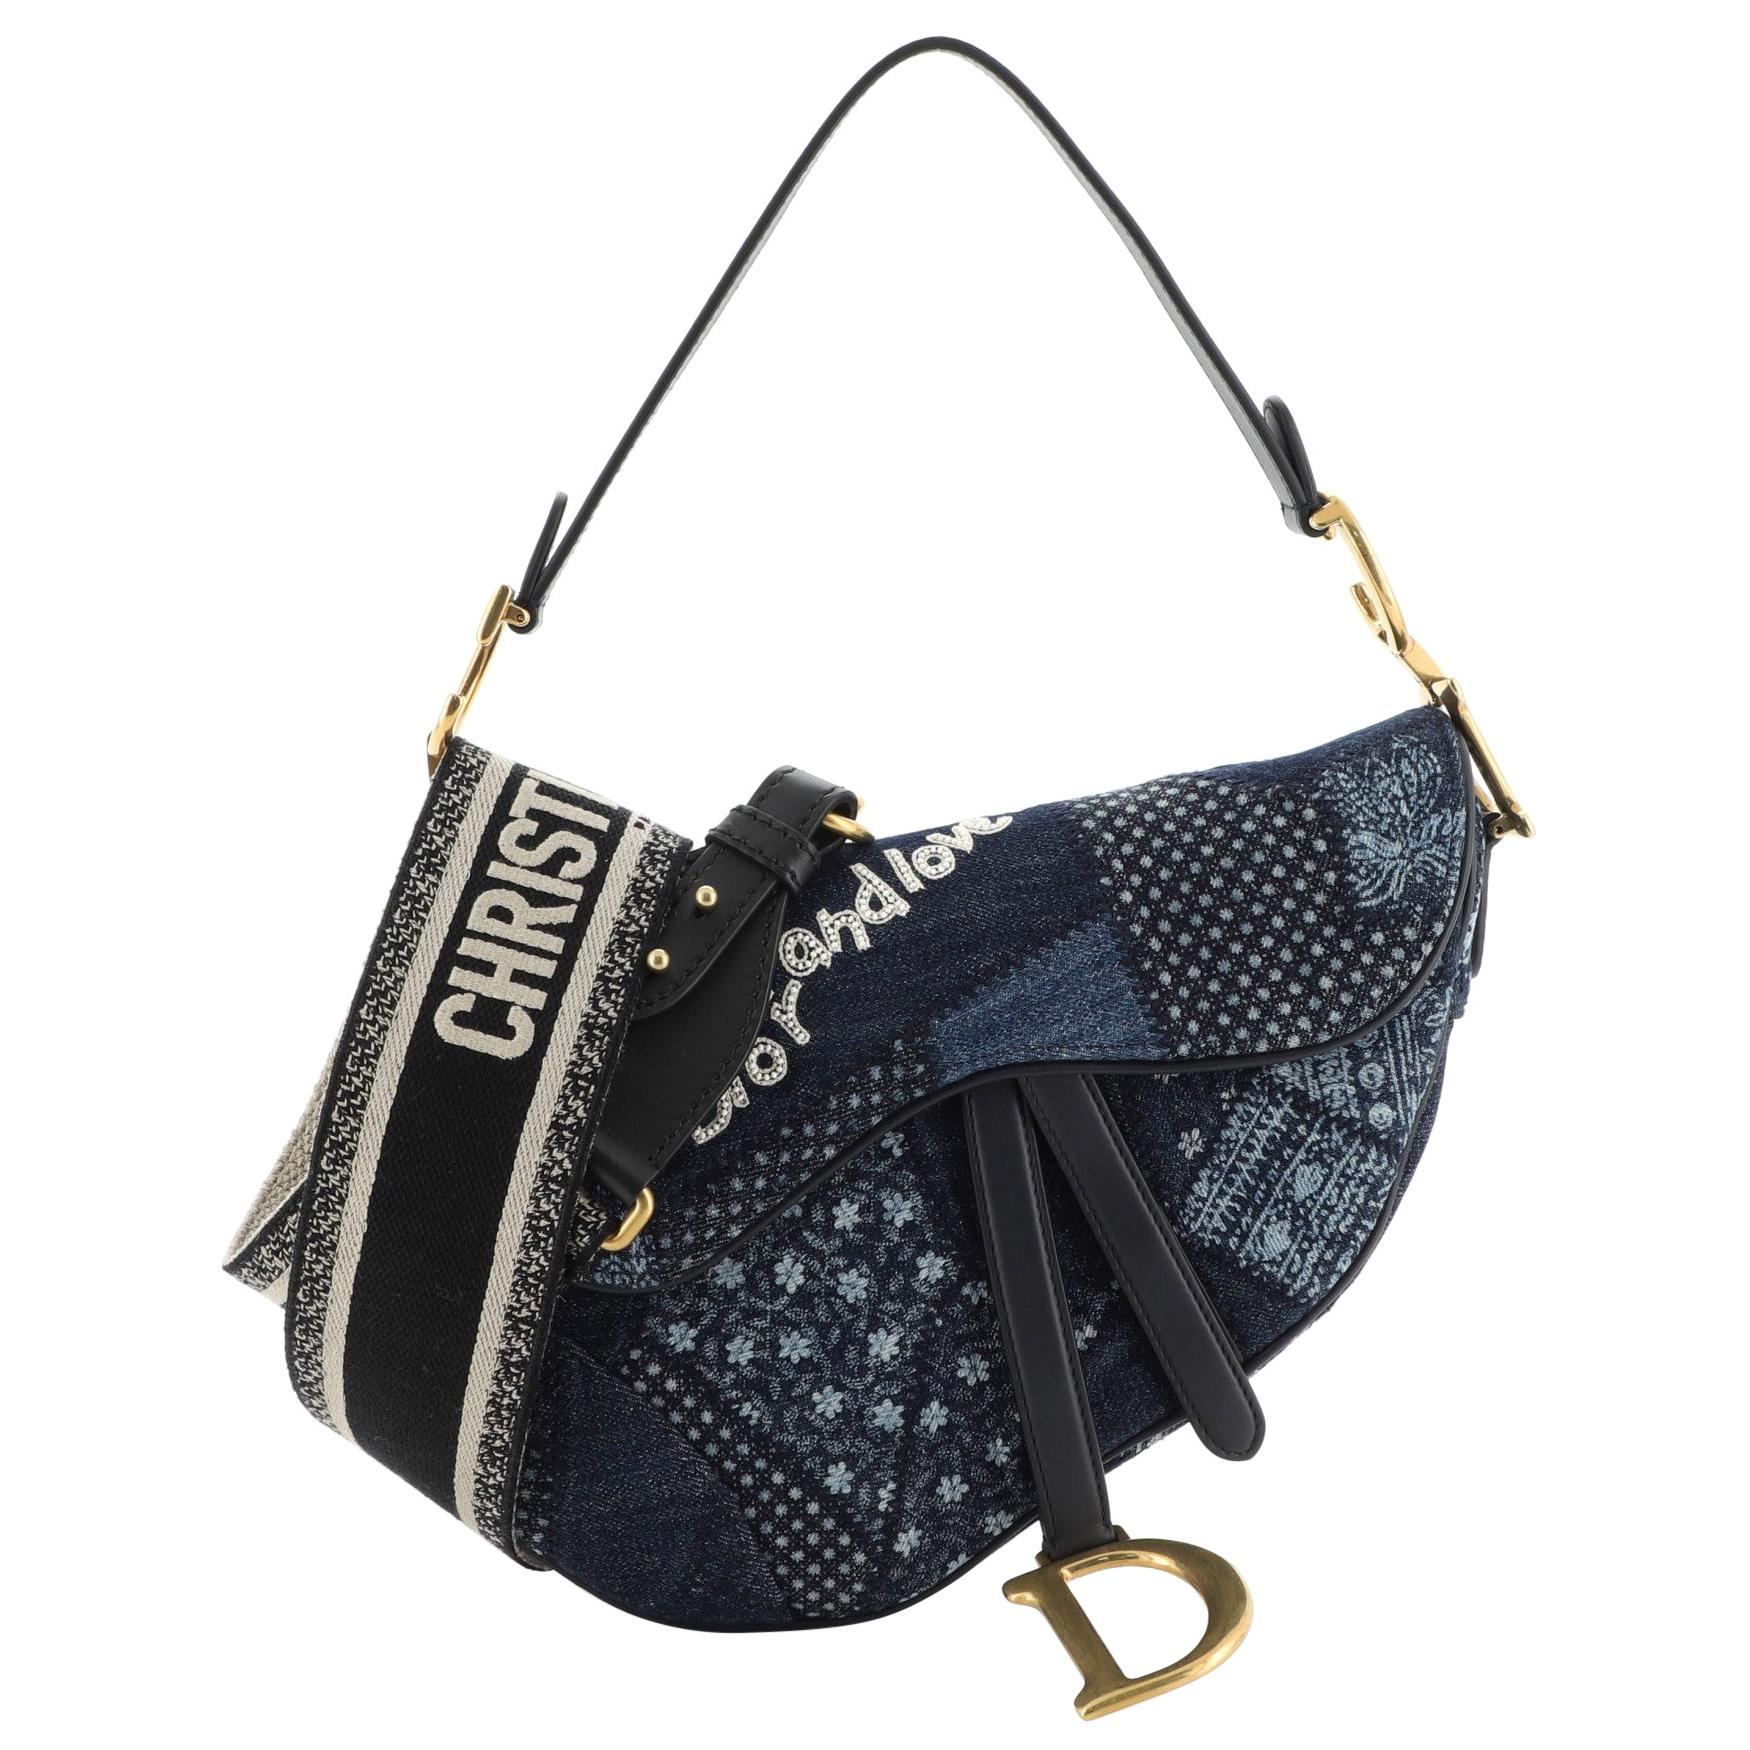 dior peace and love bag